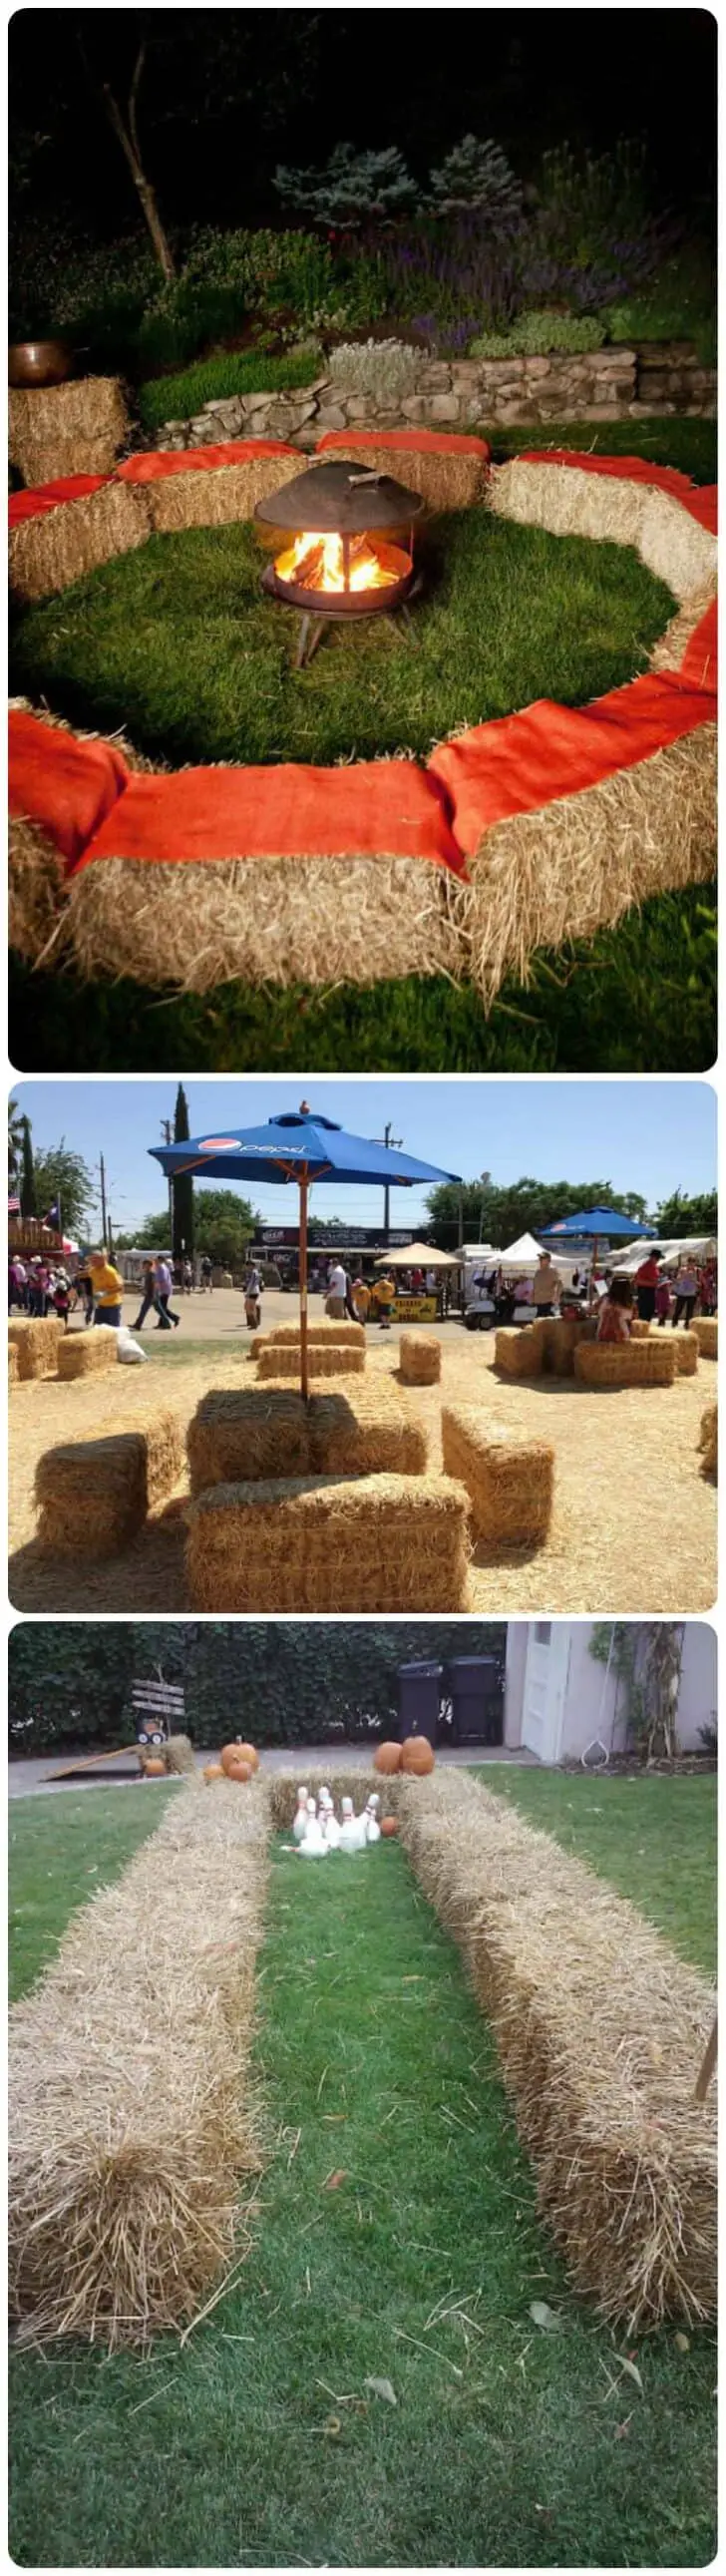 18 Ways to Use Straw Bales for a Shabby Chic Wedding/Garden Party 29 - pots